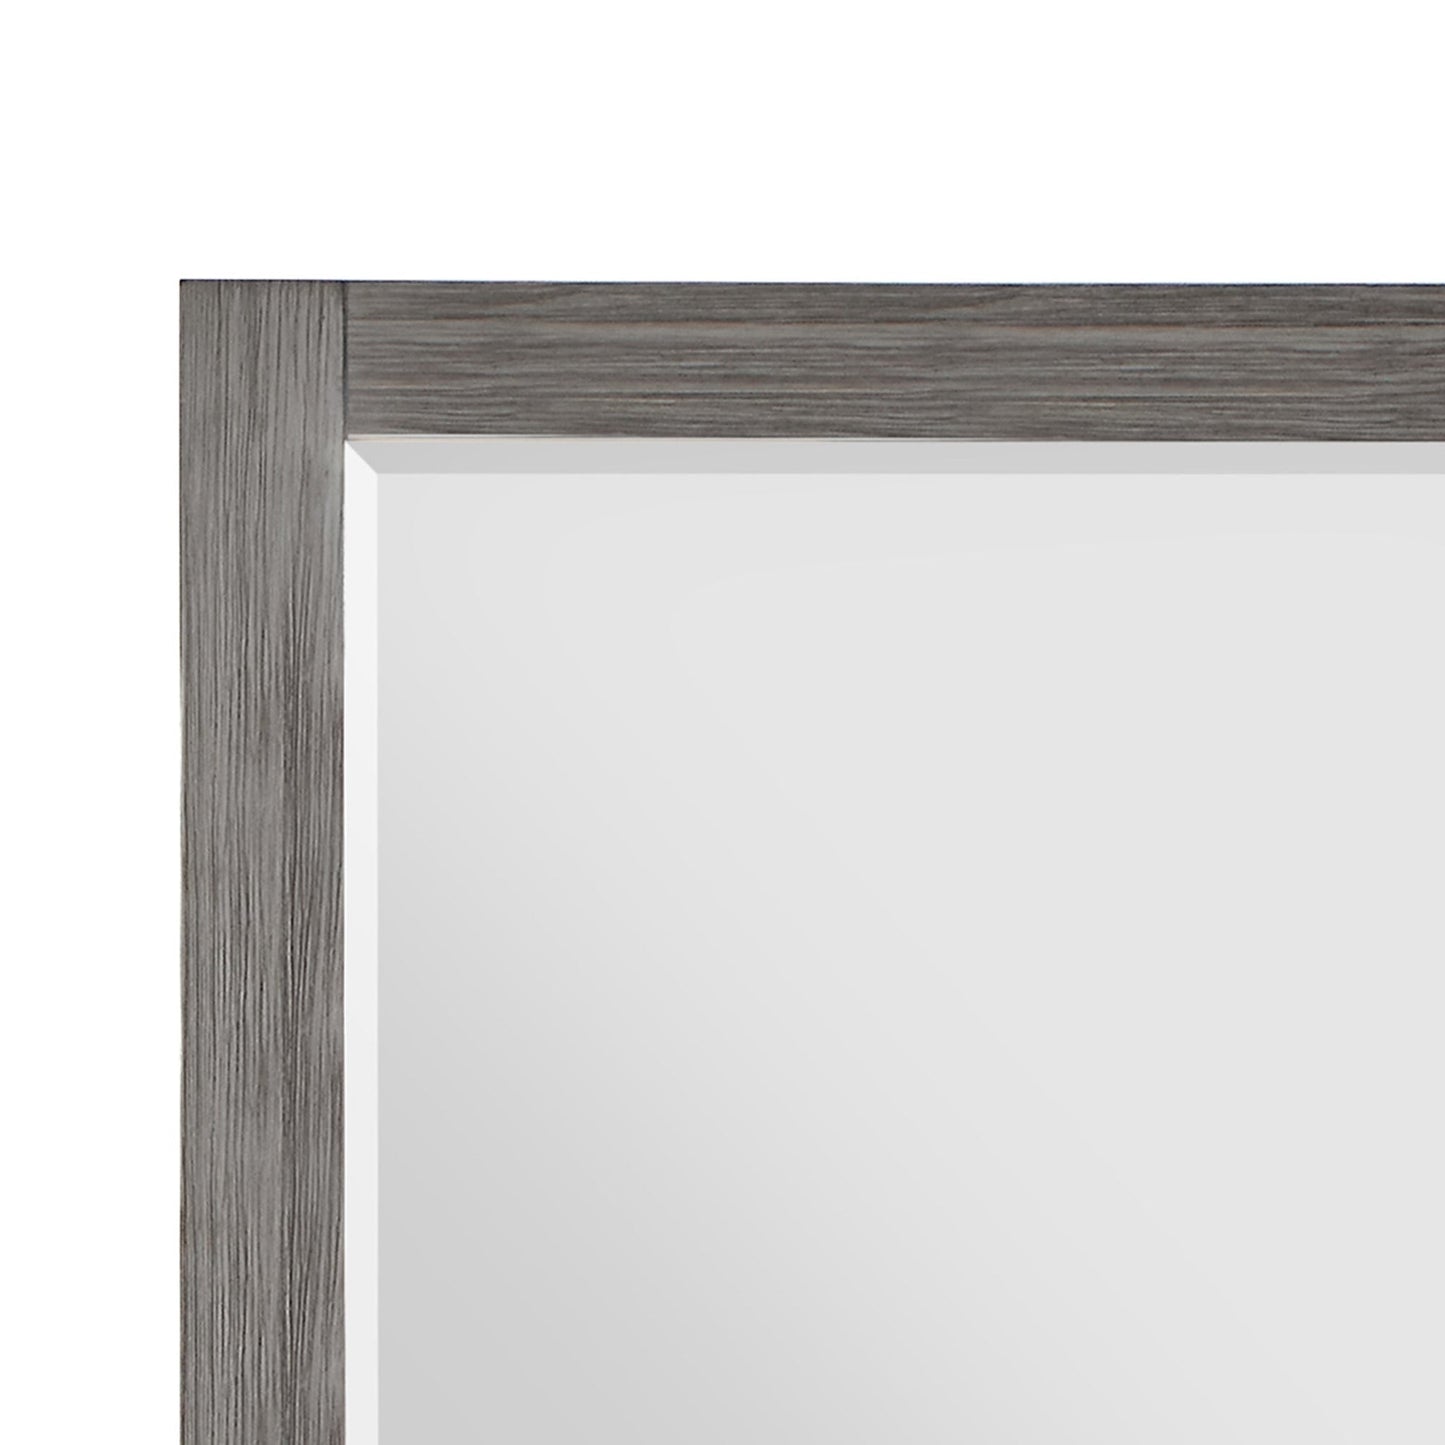 Altair Ivy 48" x 36" Rectangle Classical Gray Wood Framed Wall-Mounted Mirror